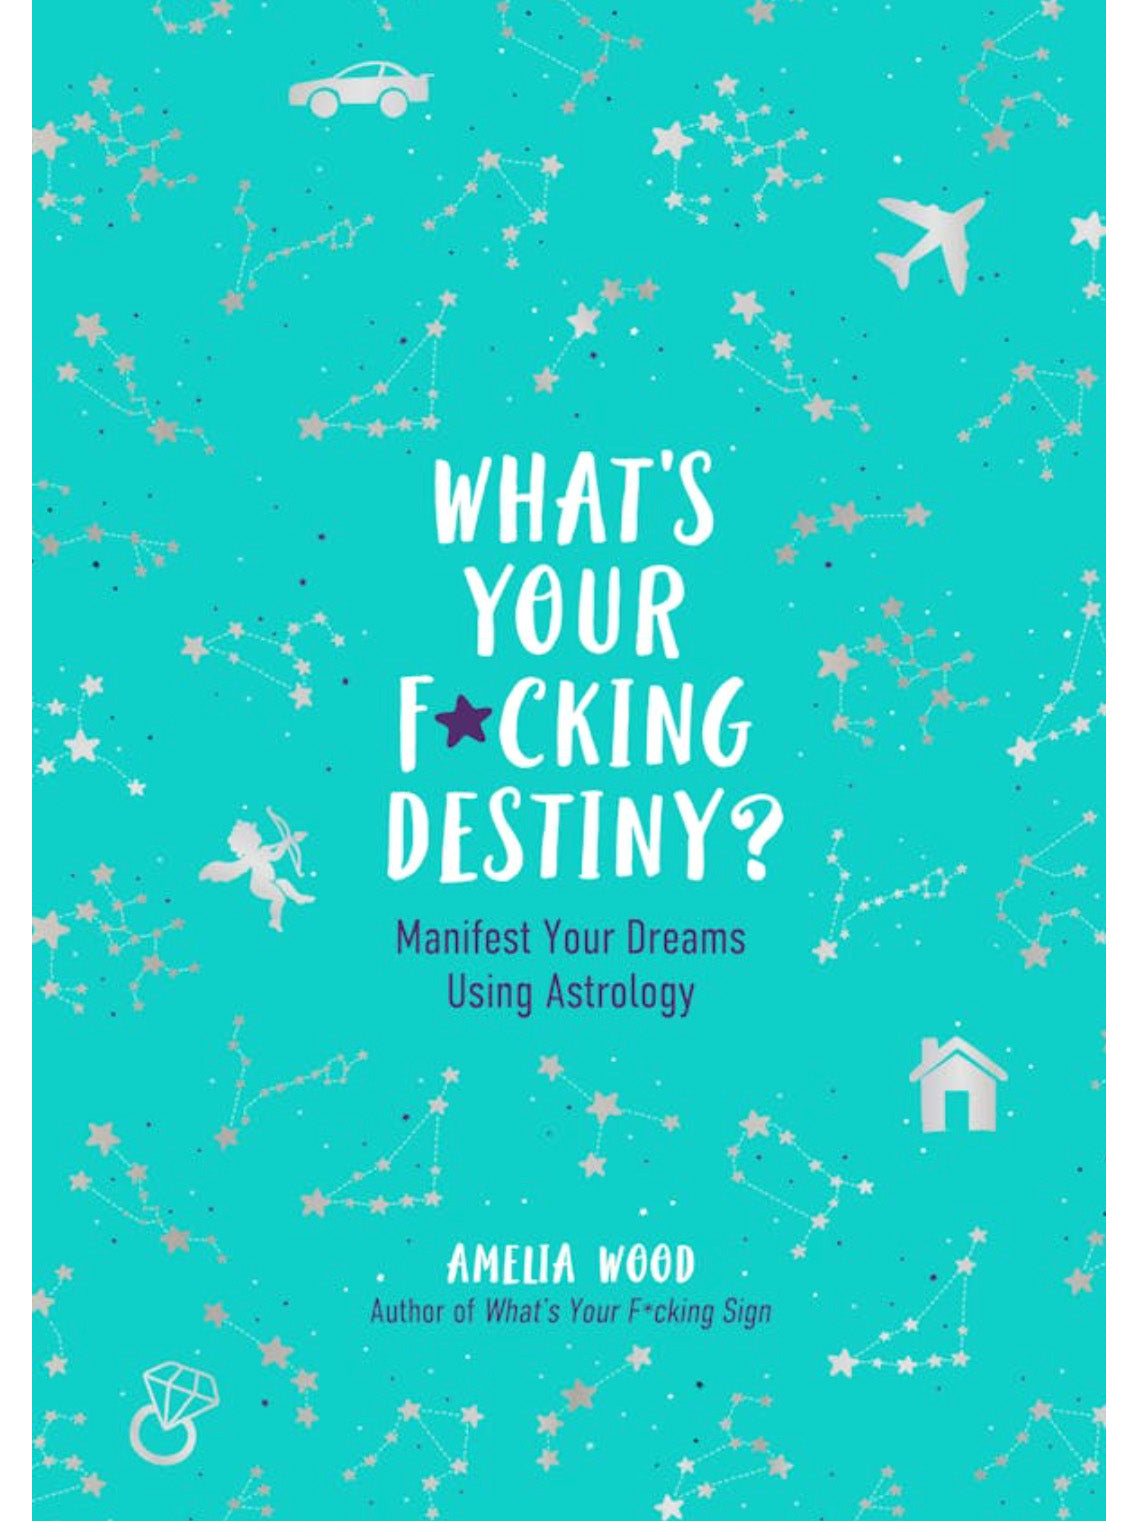 what's your f*cking destiny?